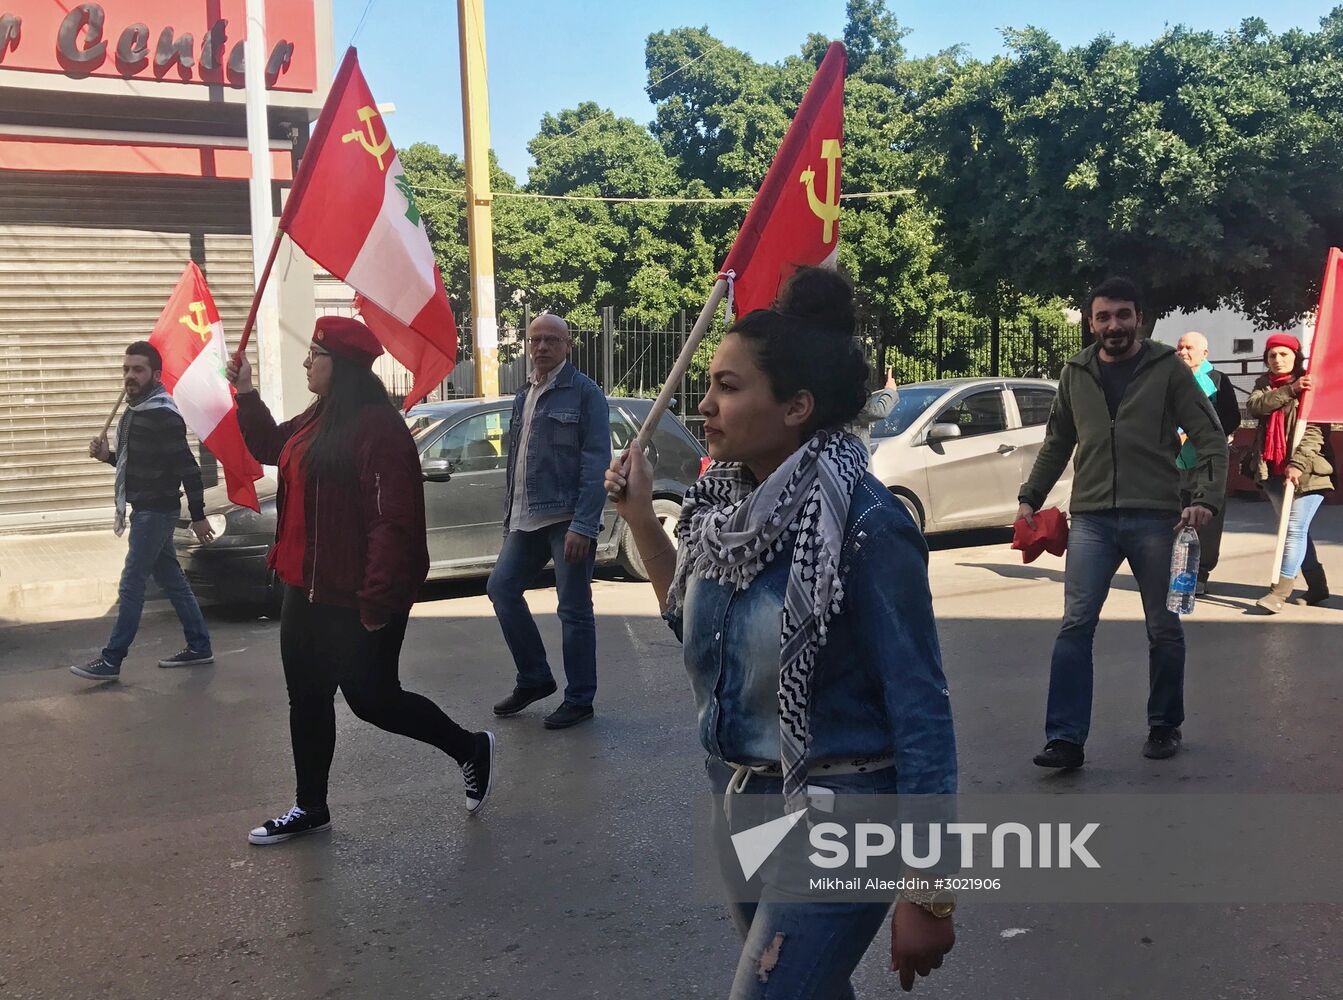 Lebanese Communist Party supporters stage peaceful demonstration